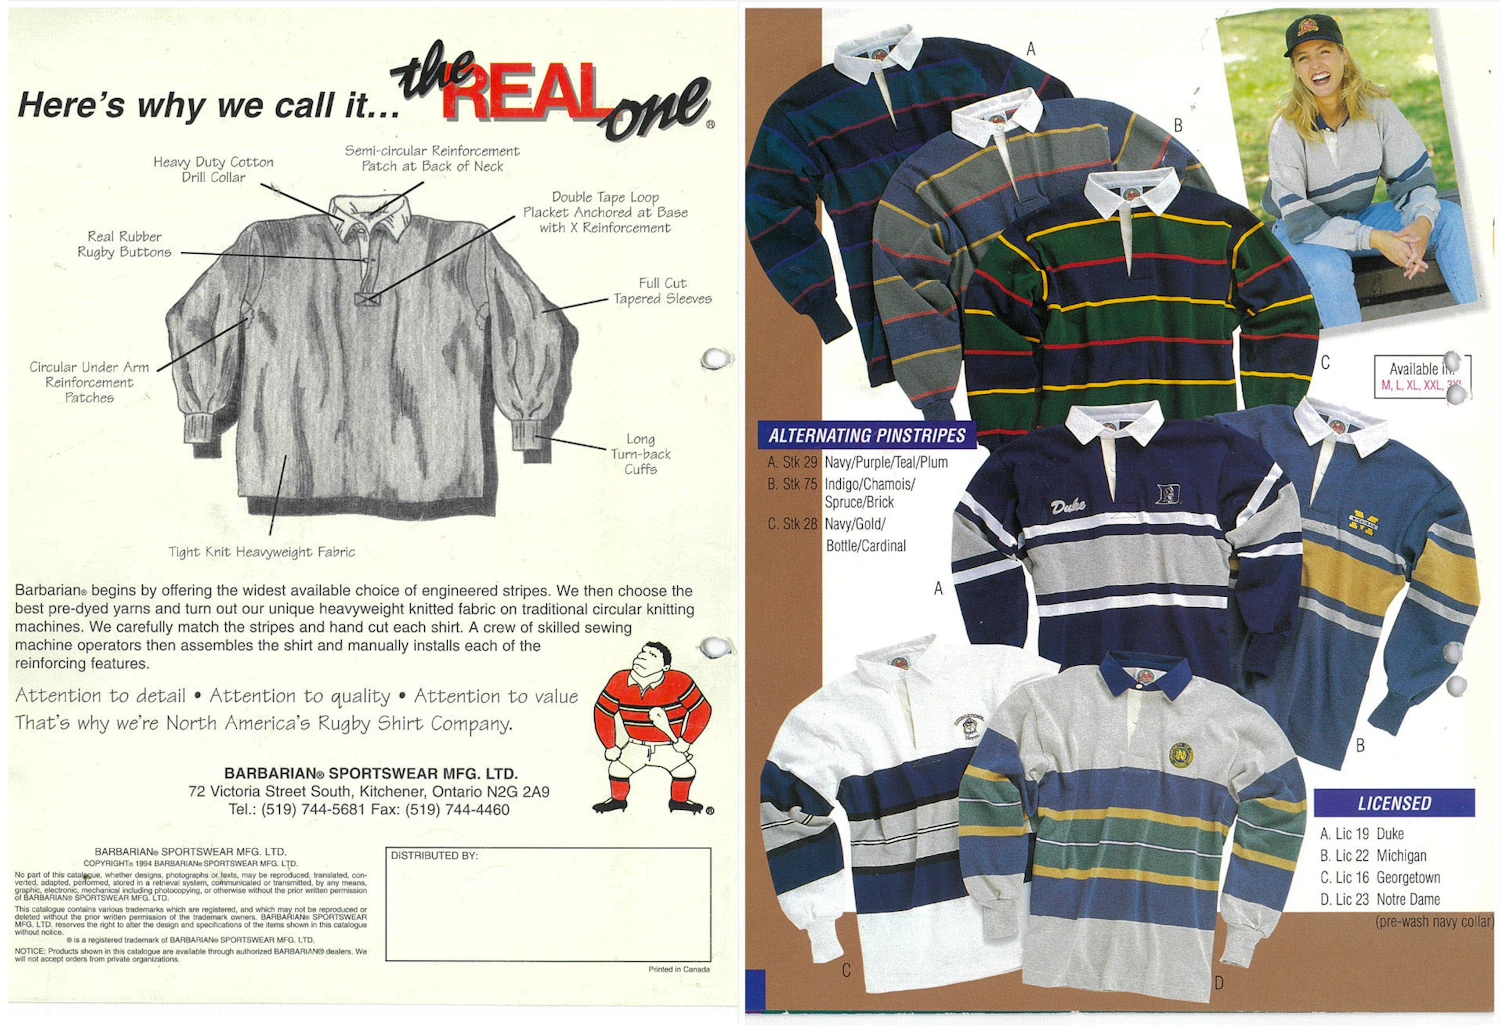 From the 1992 catalog, listing the basic details of the rugby shirts and the Alternating Pinstripes pattern